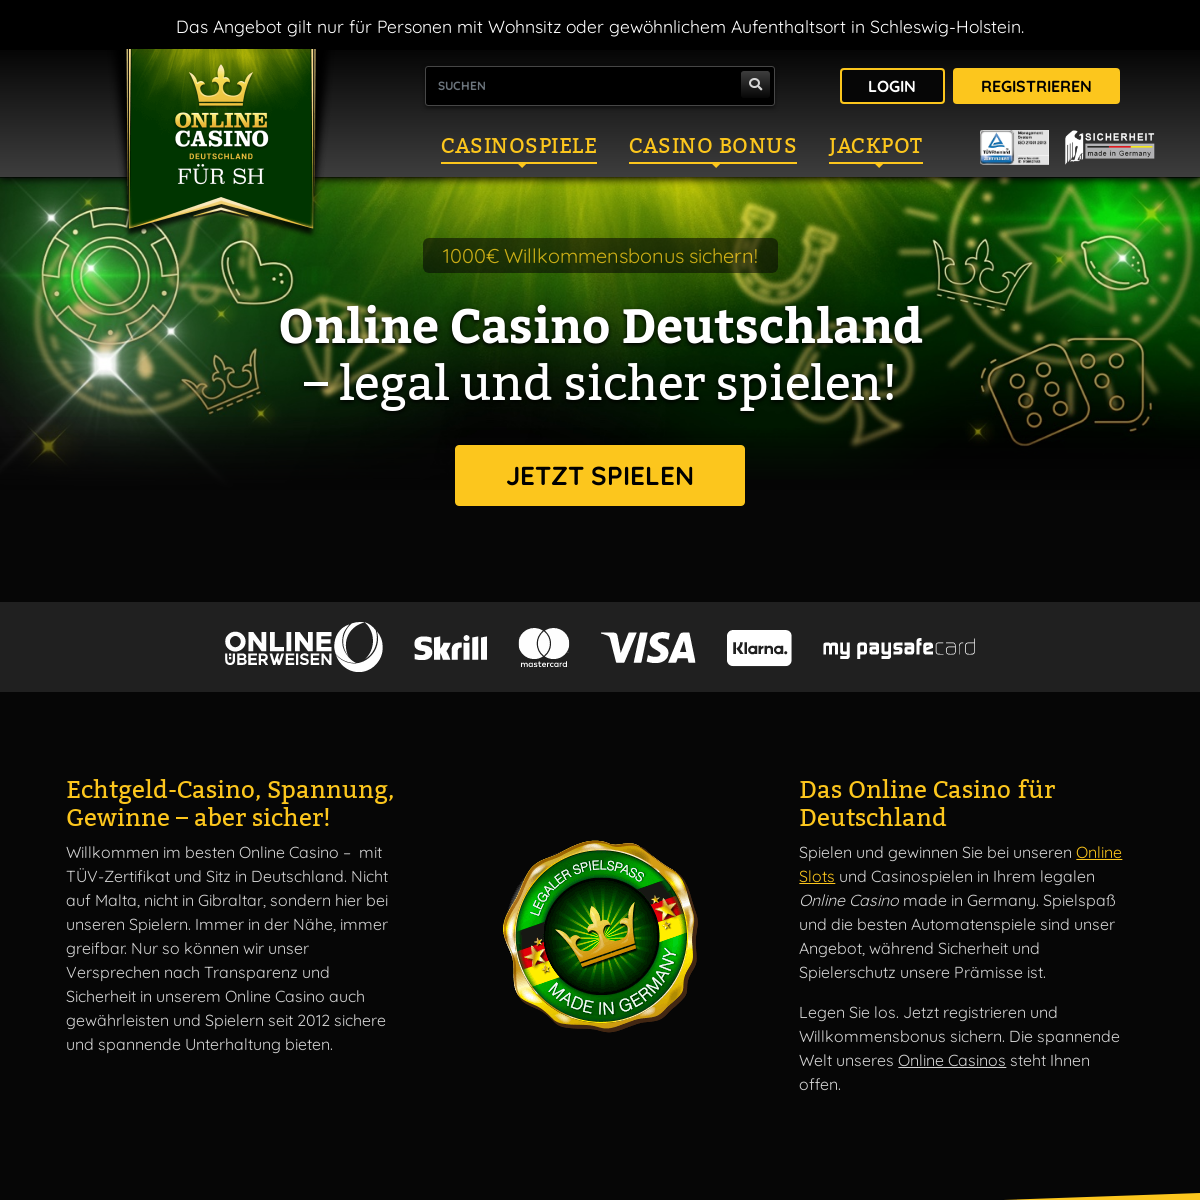 A complete backup of onlinecasino.de